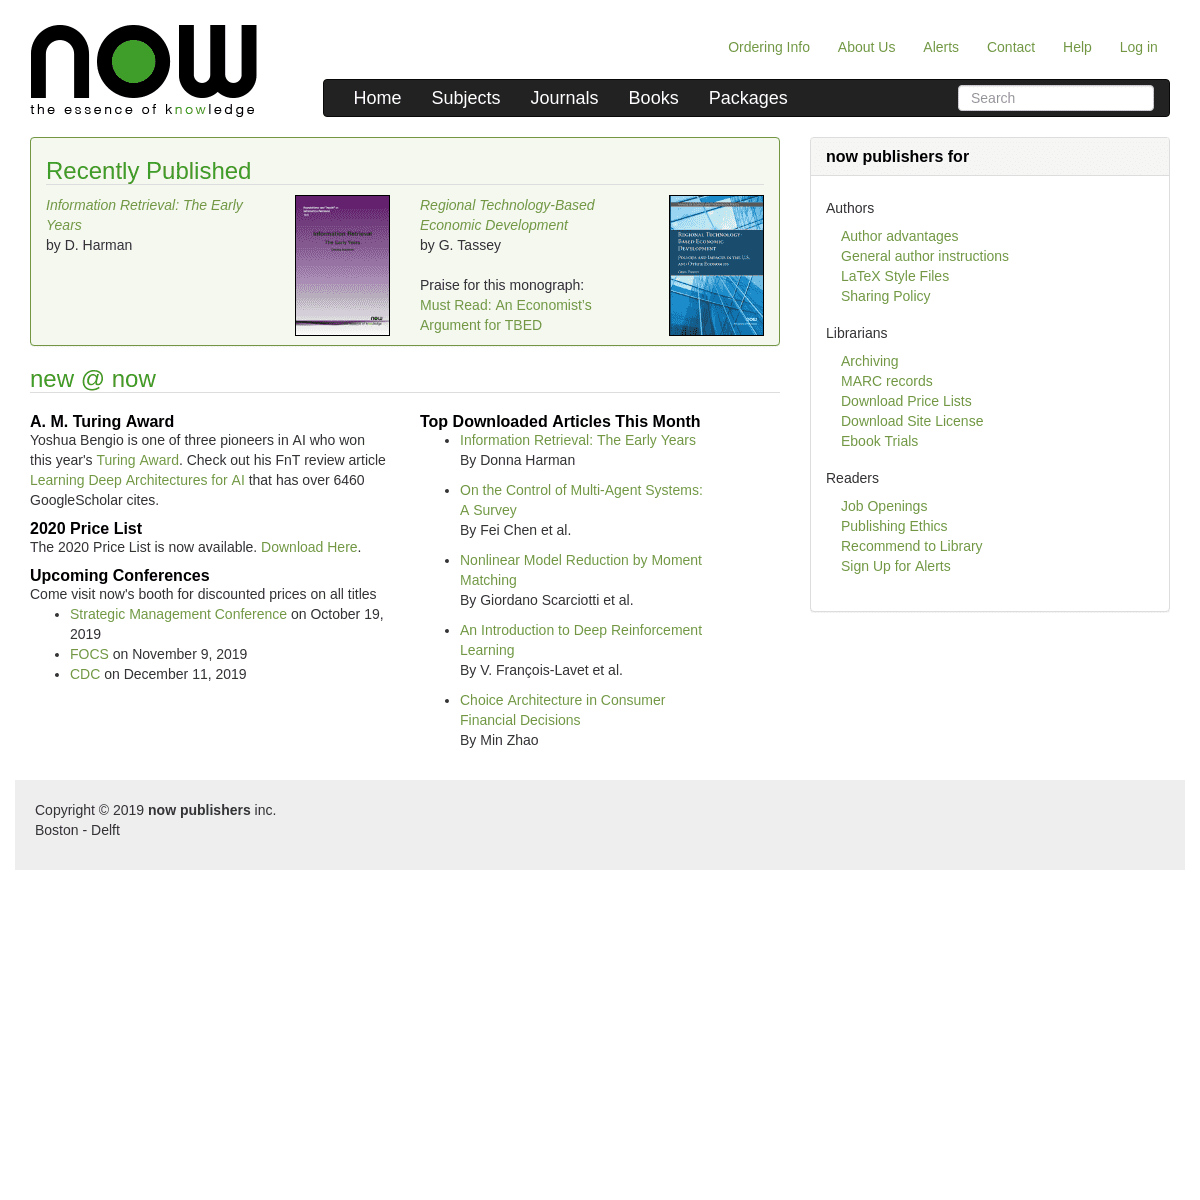 A complete backup of nowpublishers.com